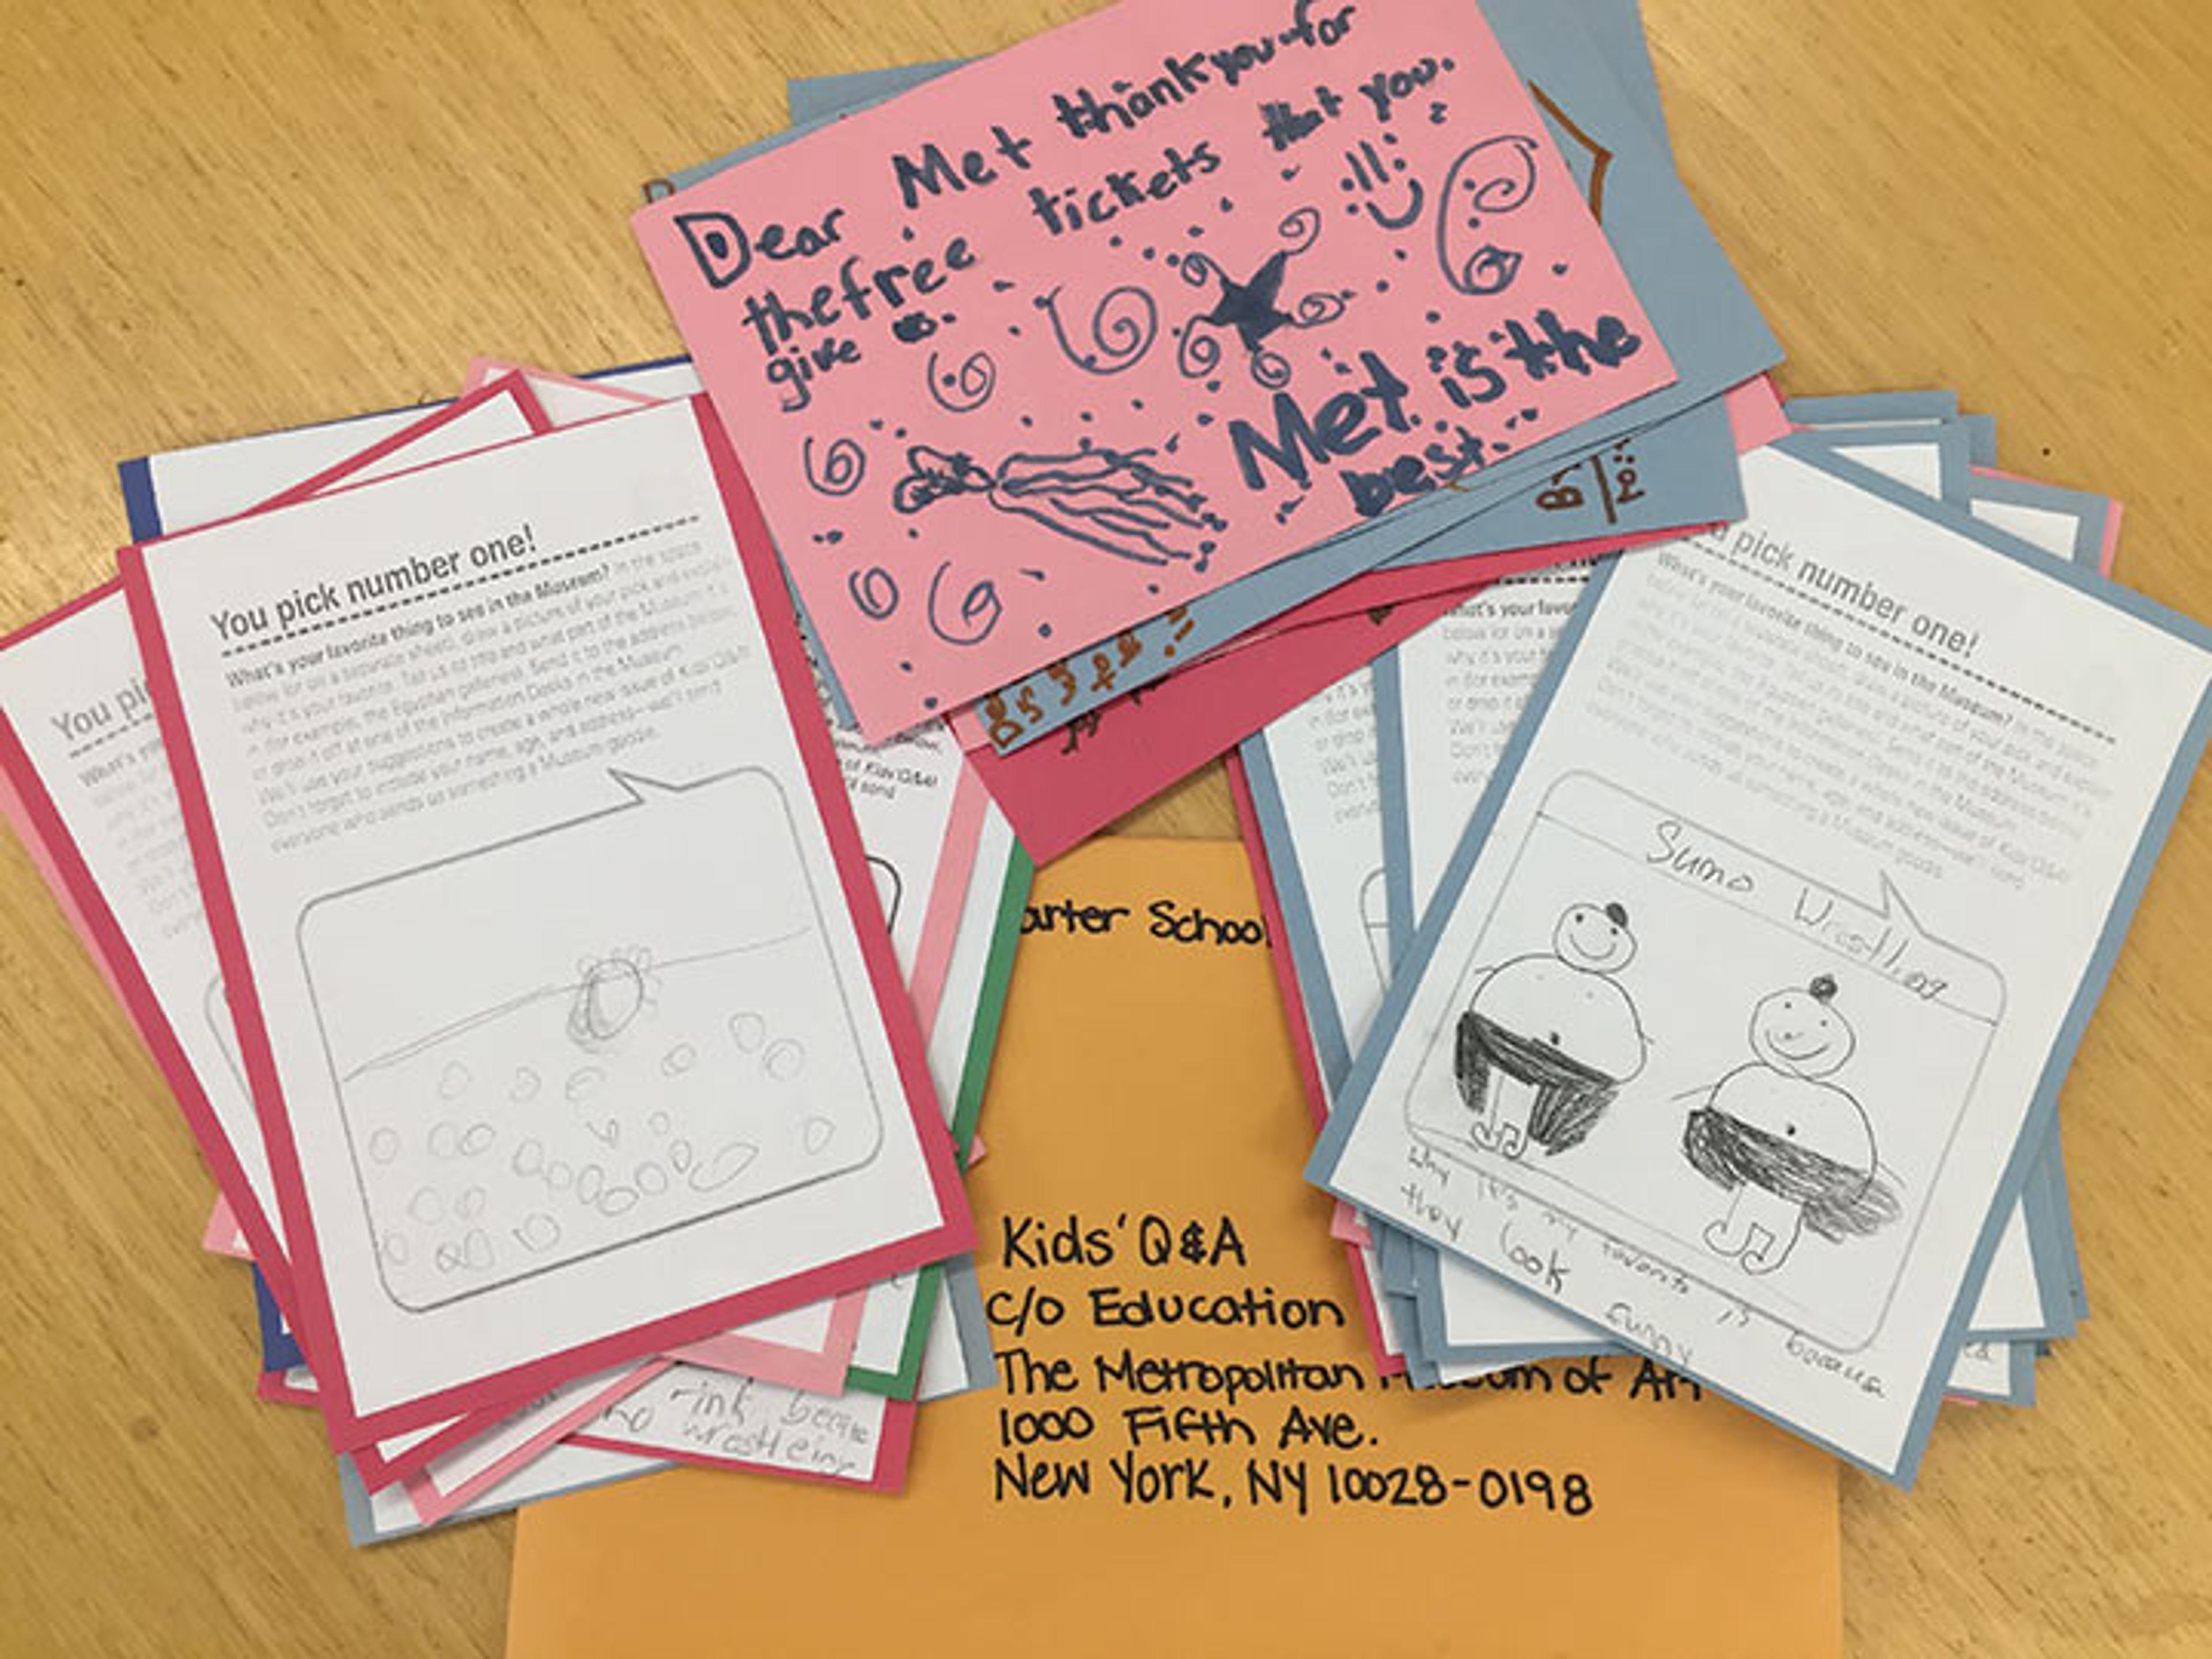 Image of kids letters and drawings